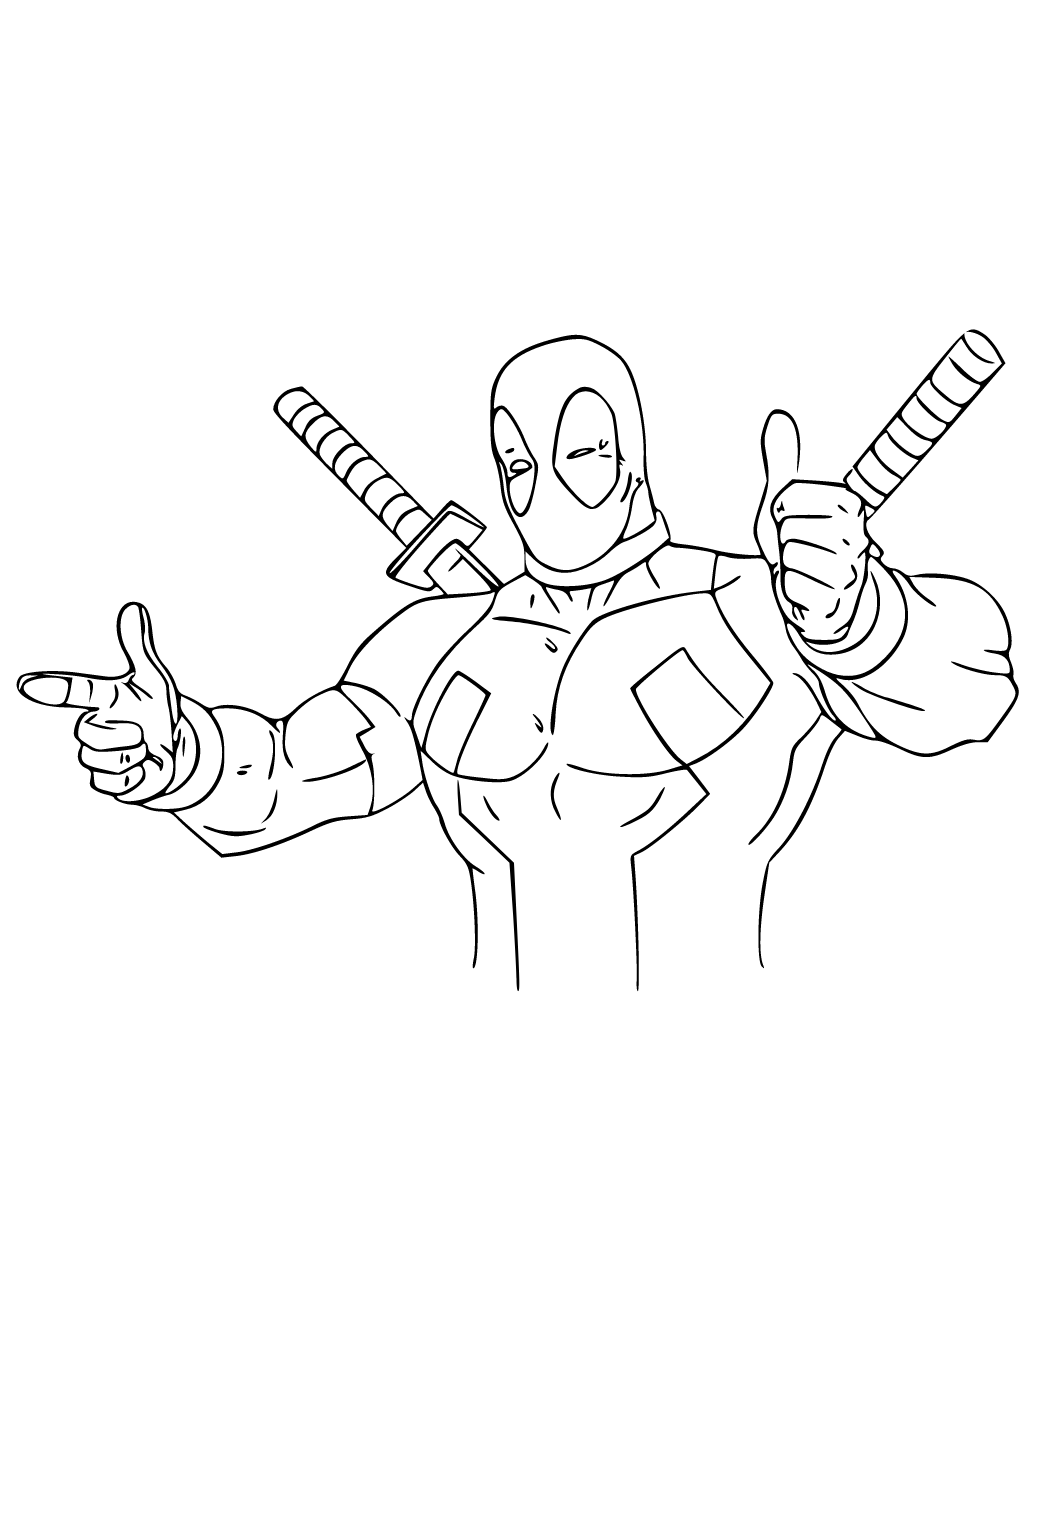 Free printable deadpool hero coloring page for adults and kids